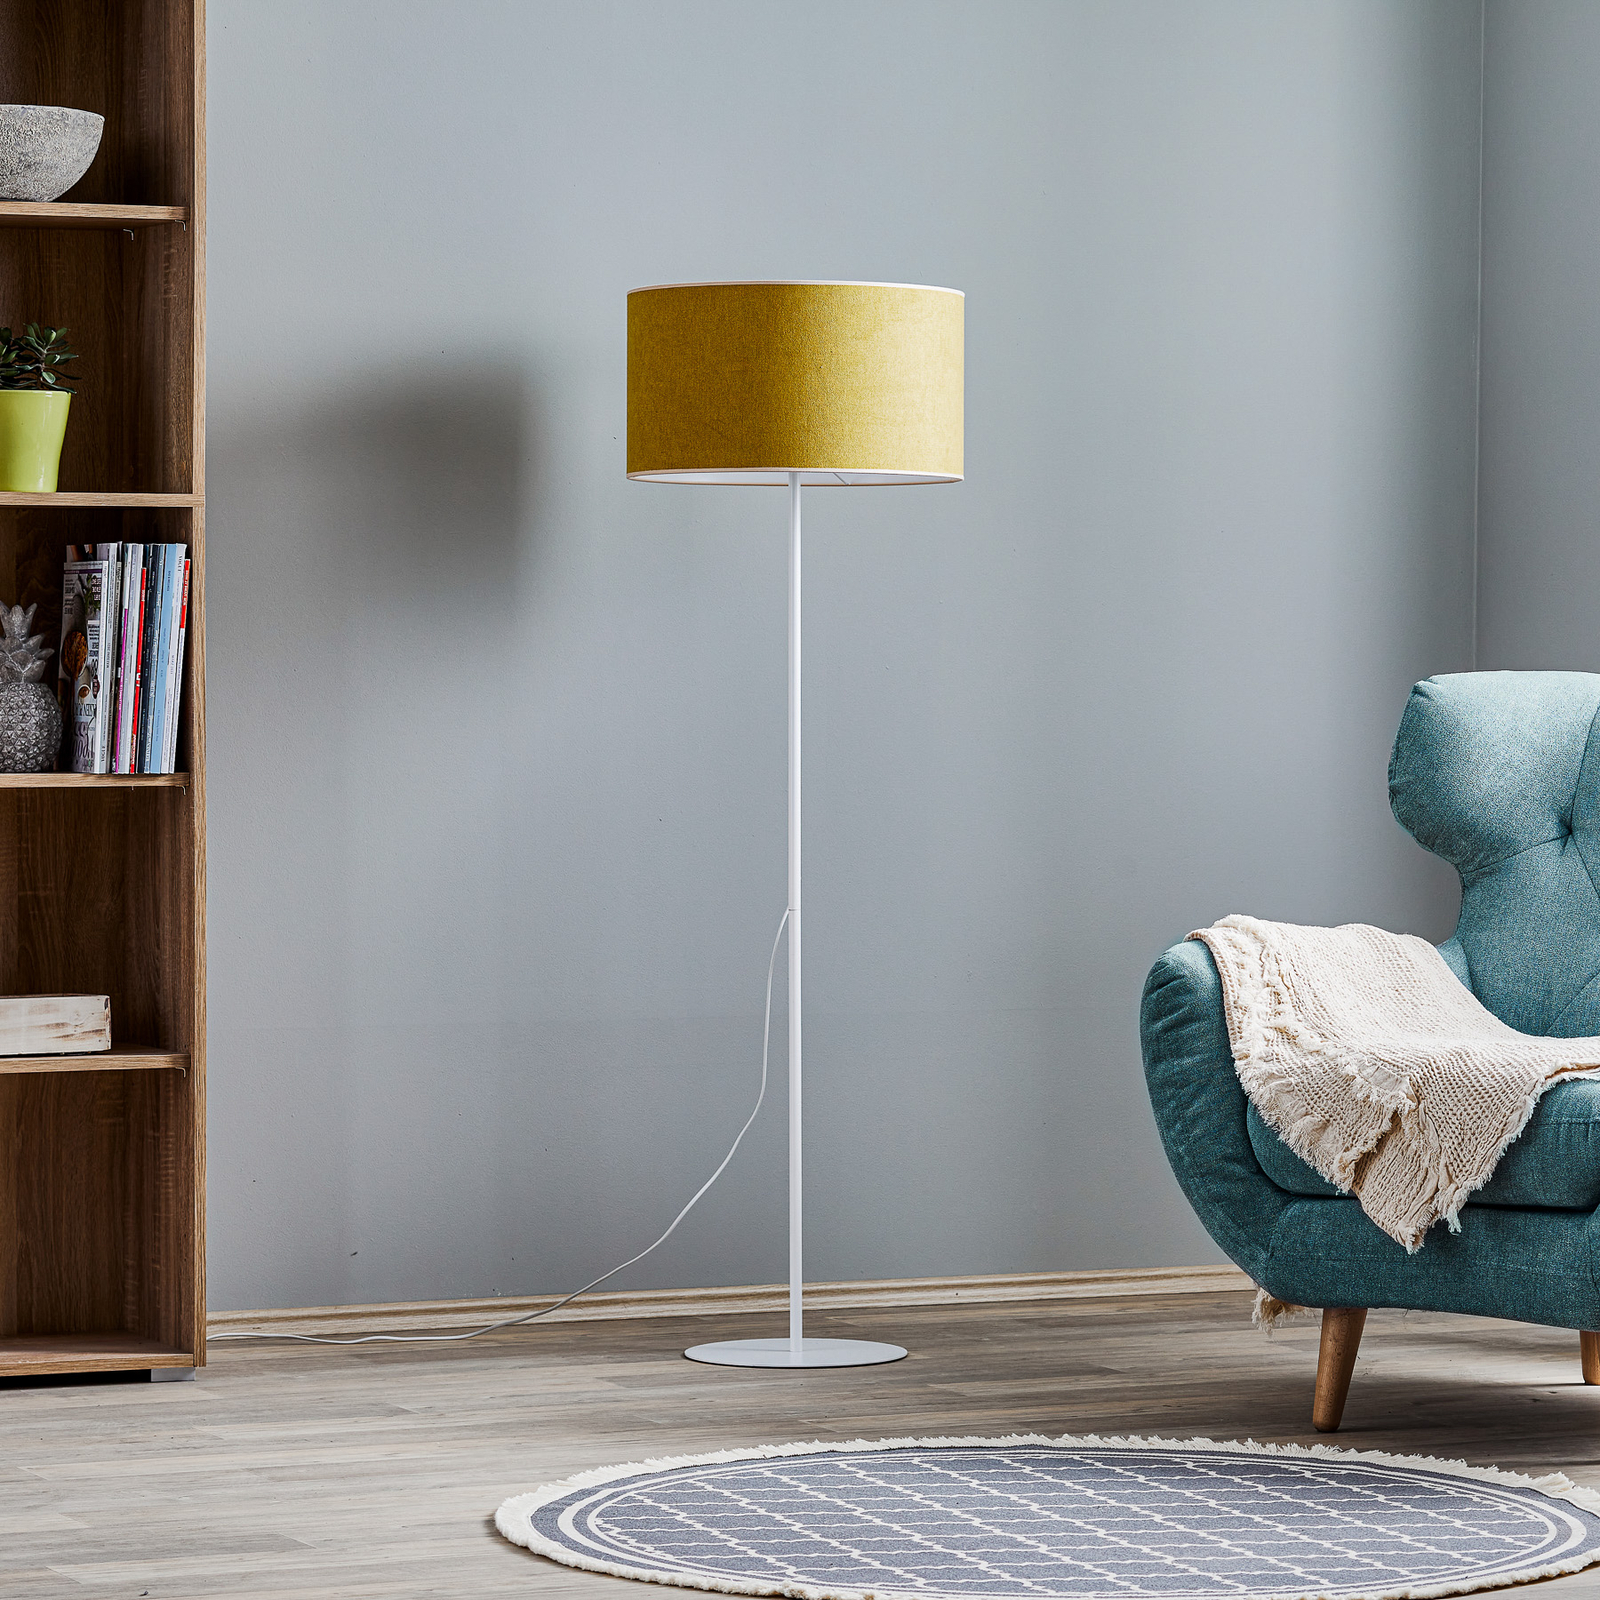 Pastell Roller floor lamp in bright yellow